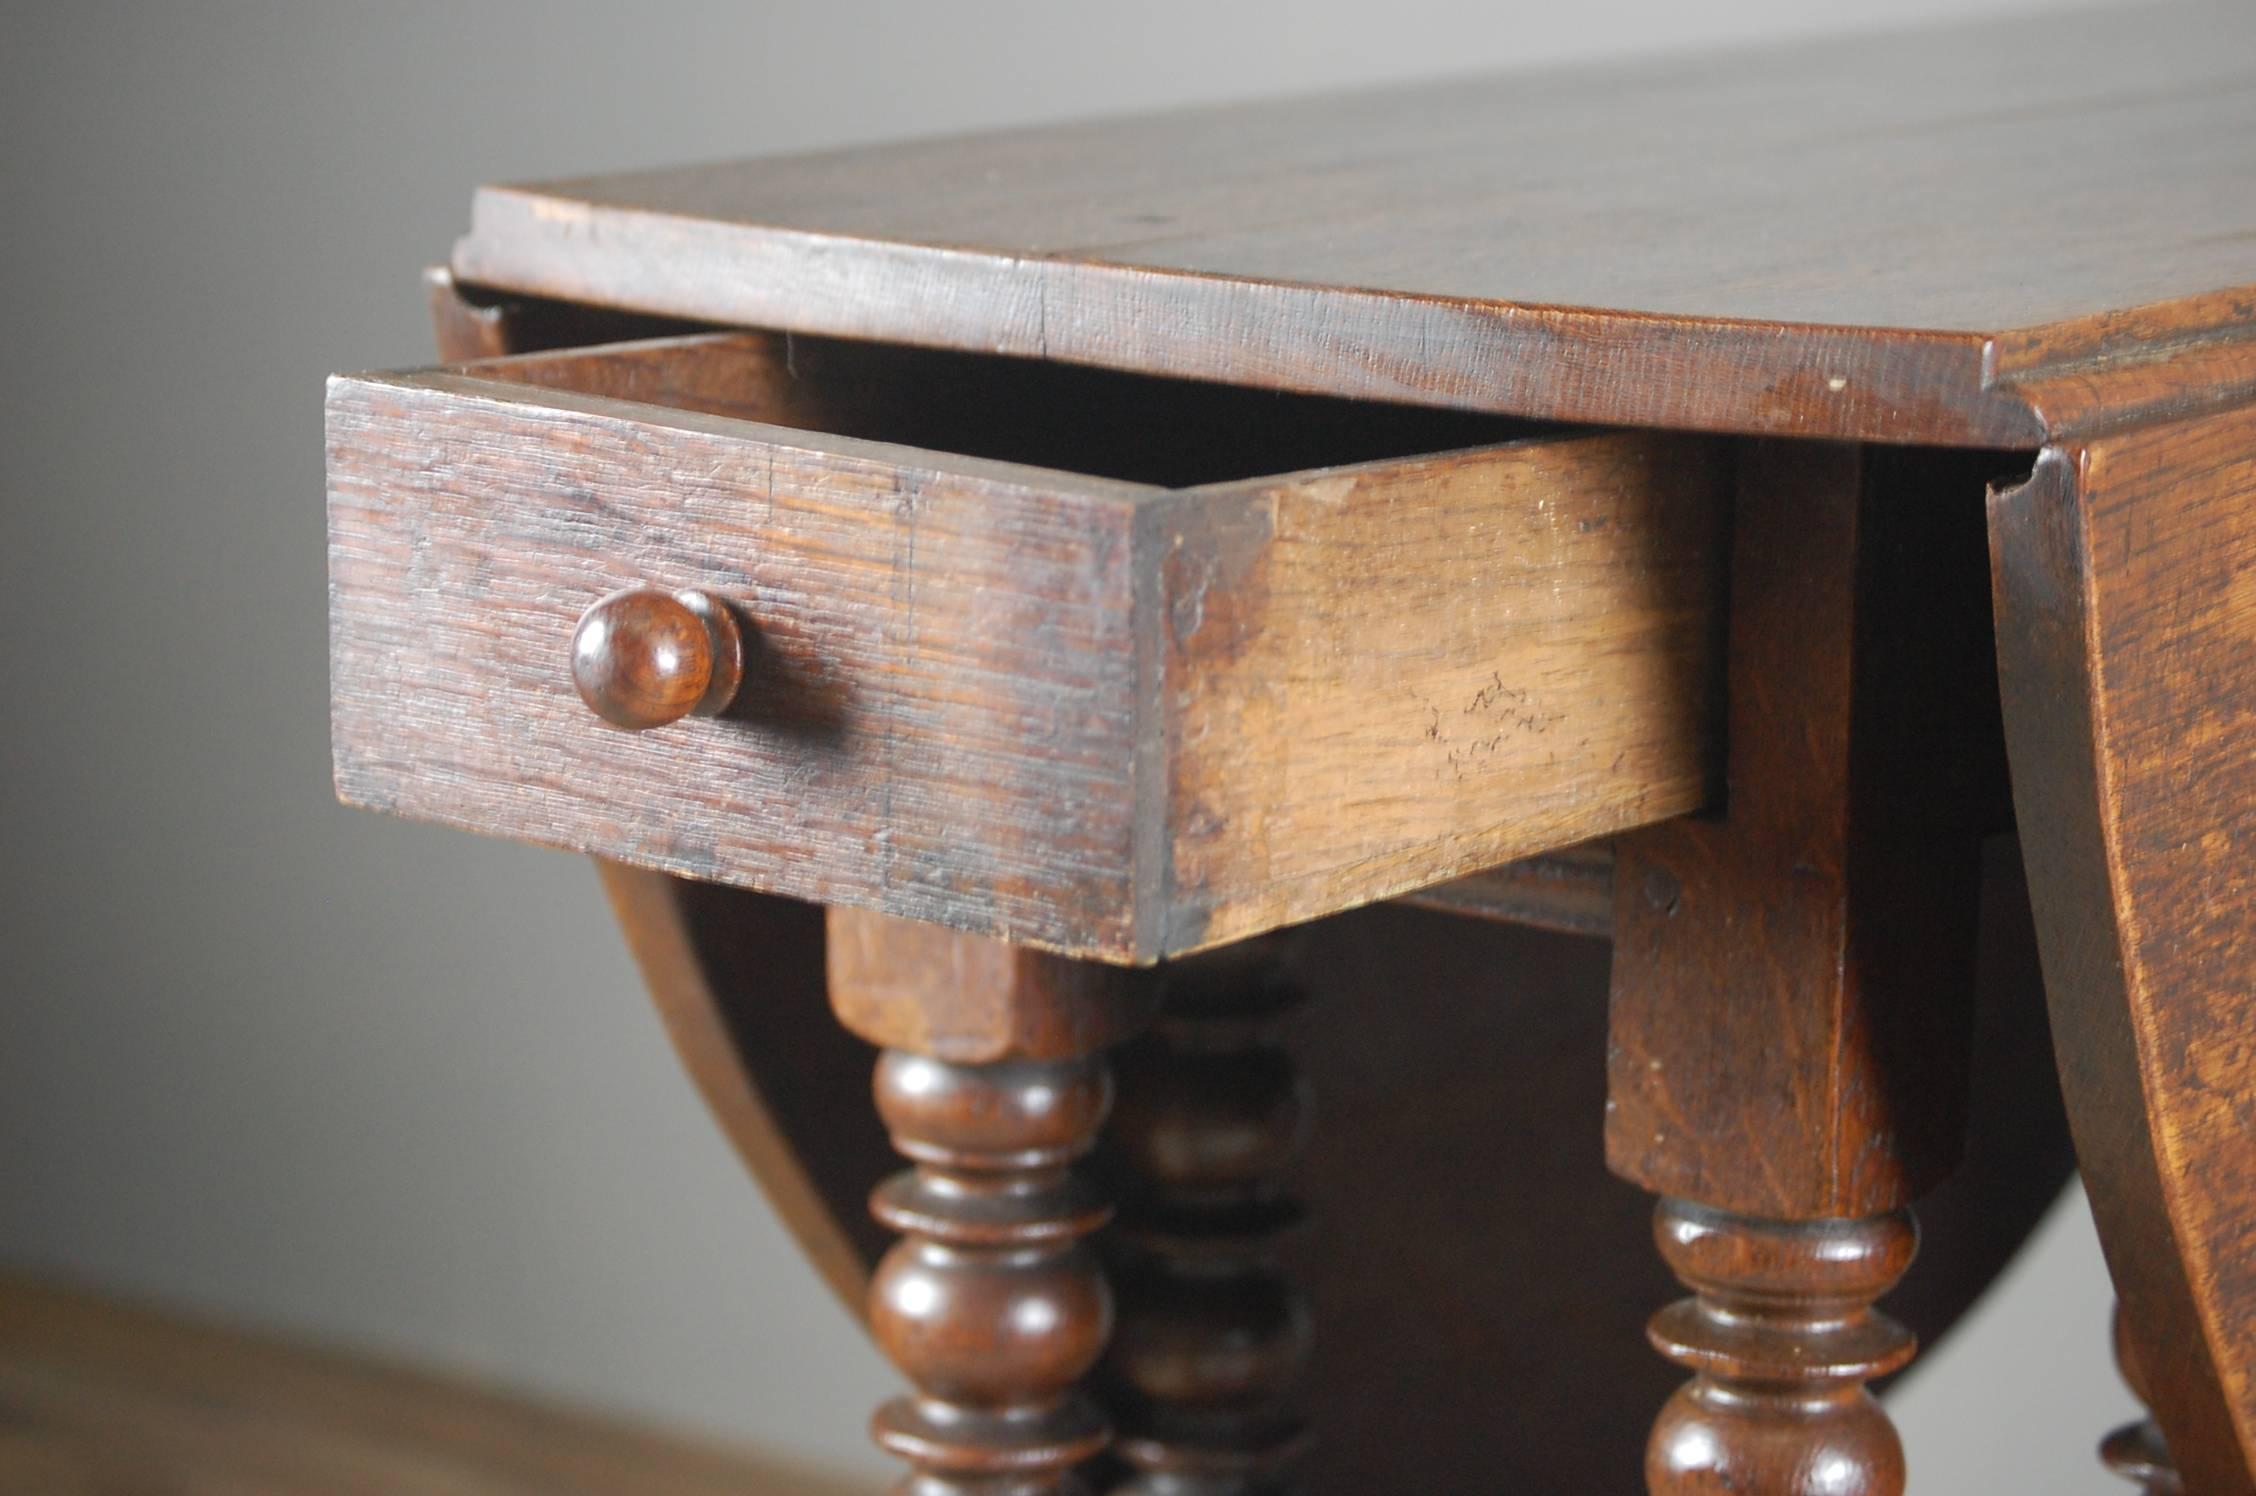 Early 19th century English oak oval gateleg table, simple apron to turned legs, pegged construction. simple stretchers with carved detail, raised on turned feet. Nice patination and wear.